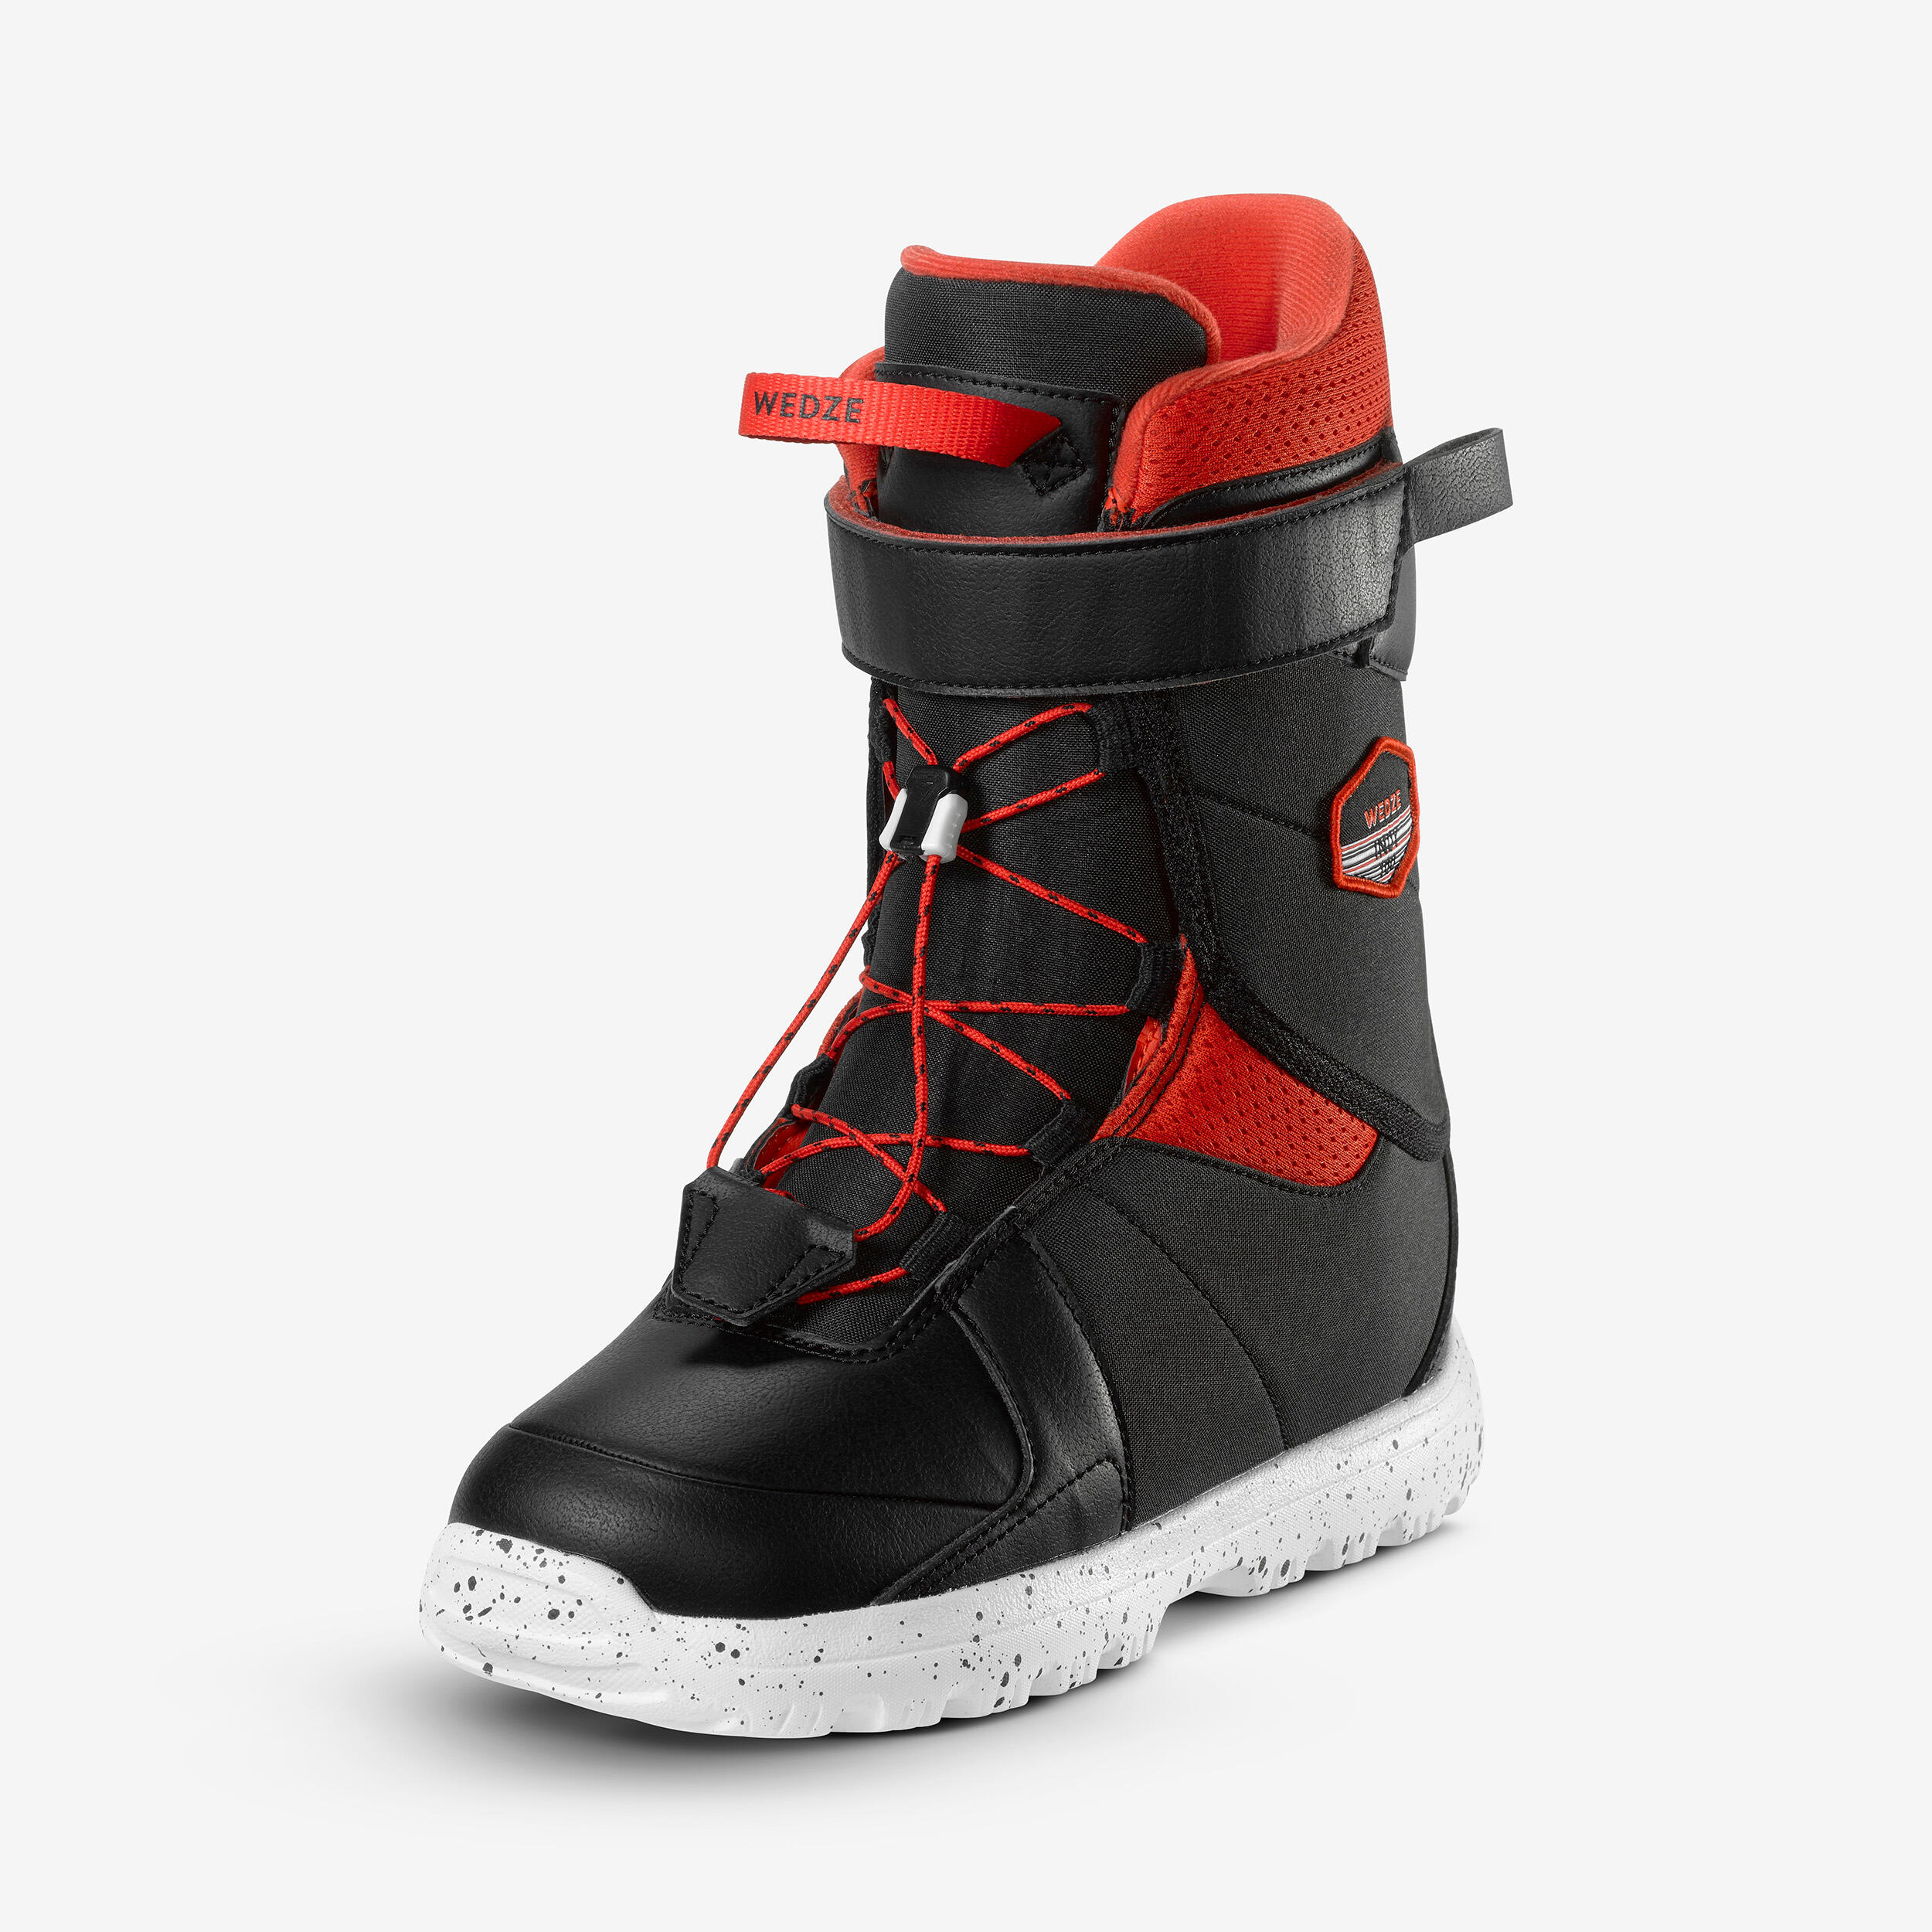 Image of Kids’ Snowboarding Boots – Indy 100